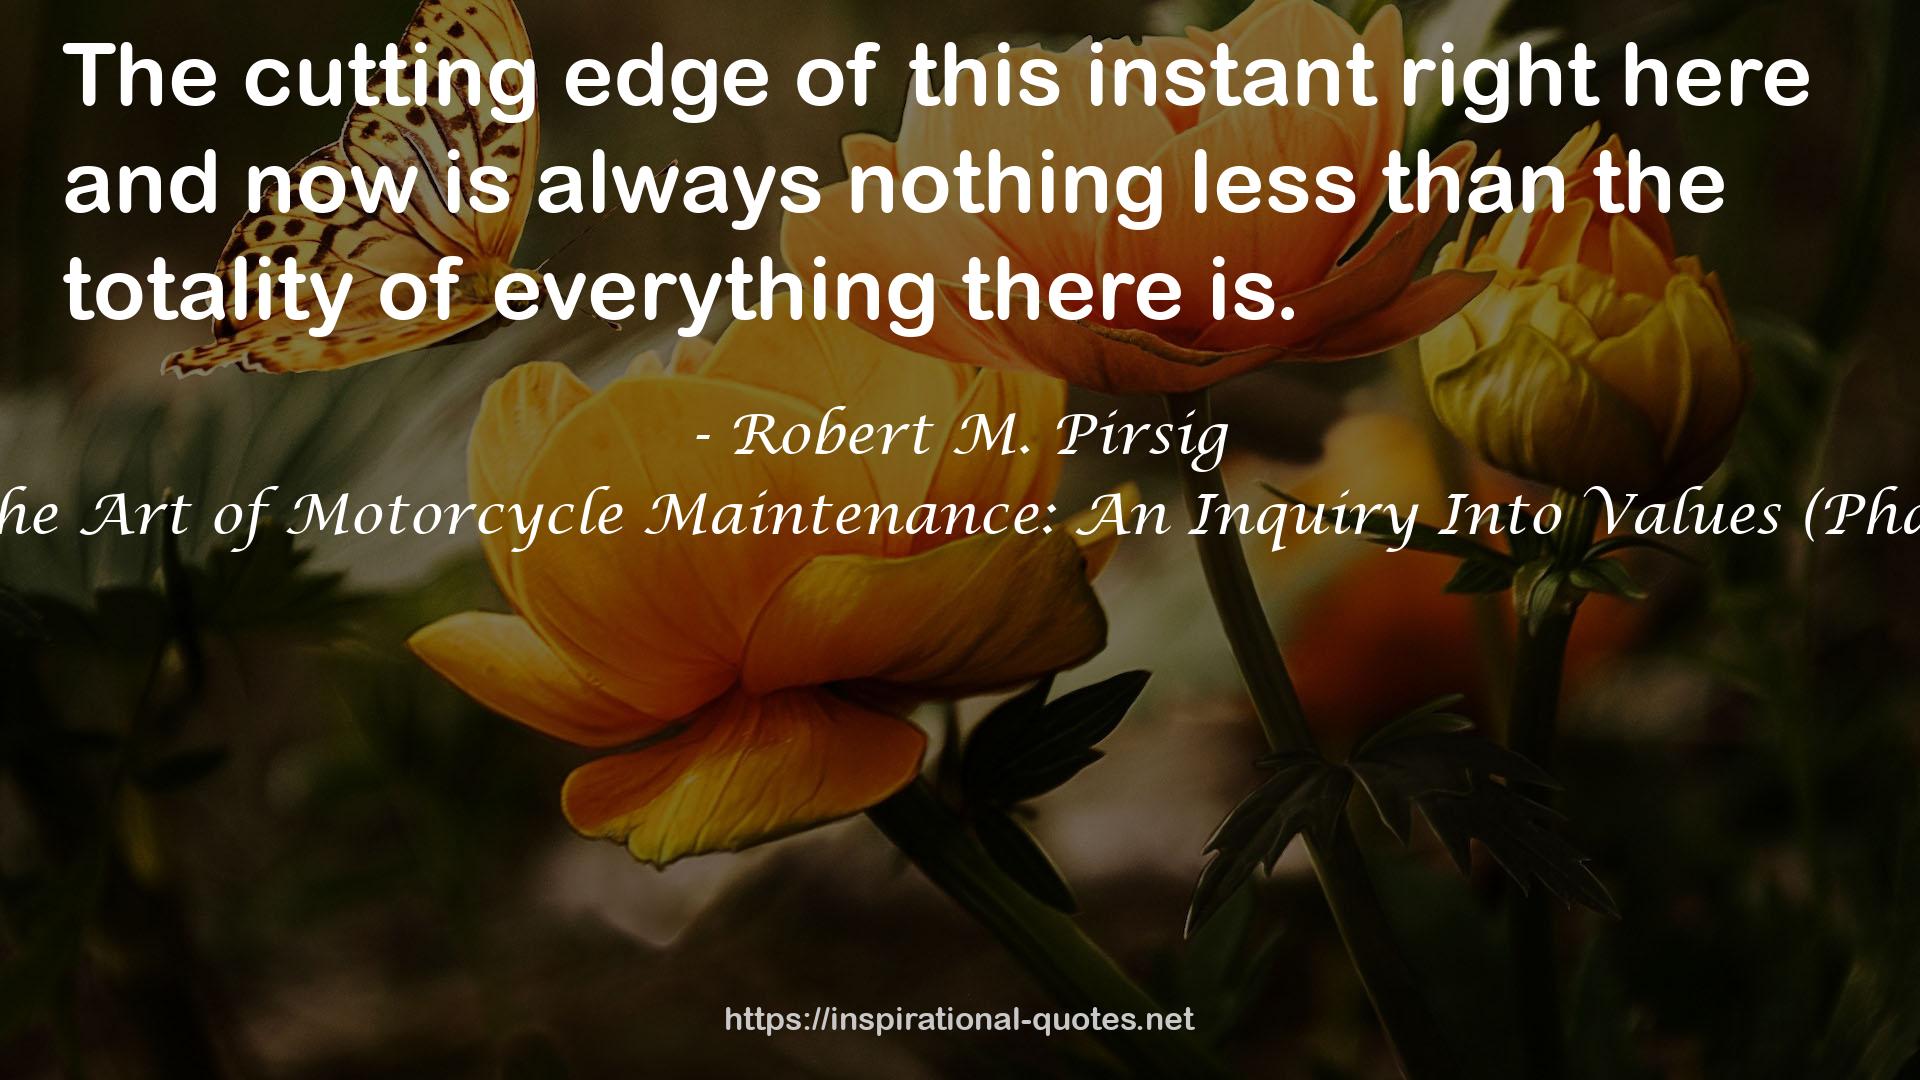 Zen and the Art of Motorcycle Maintenance: An Inquiry Into Values (Phaedrus, #1) QUOTES